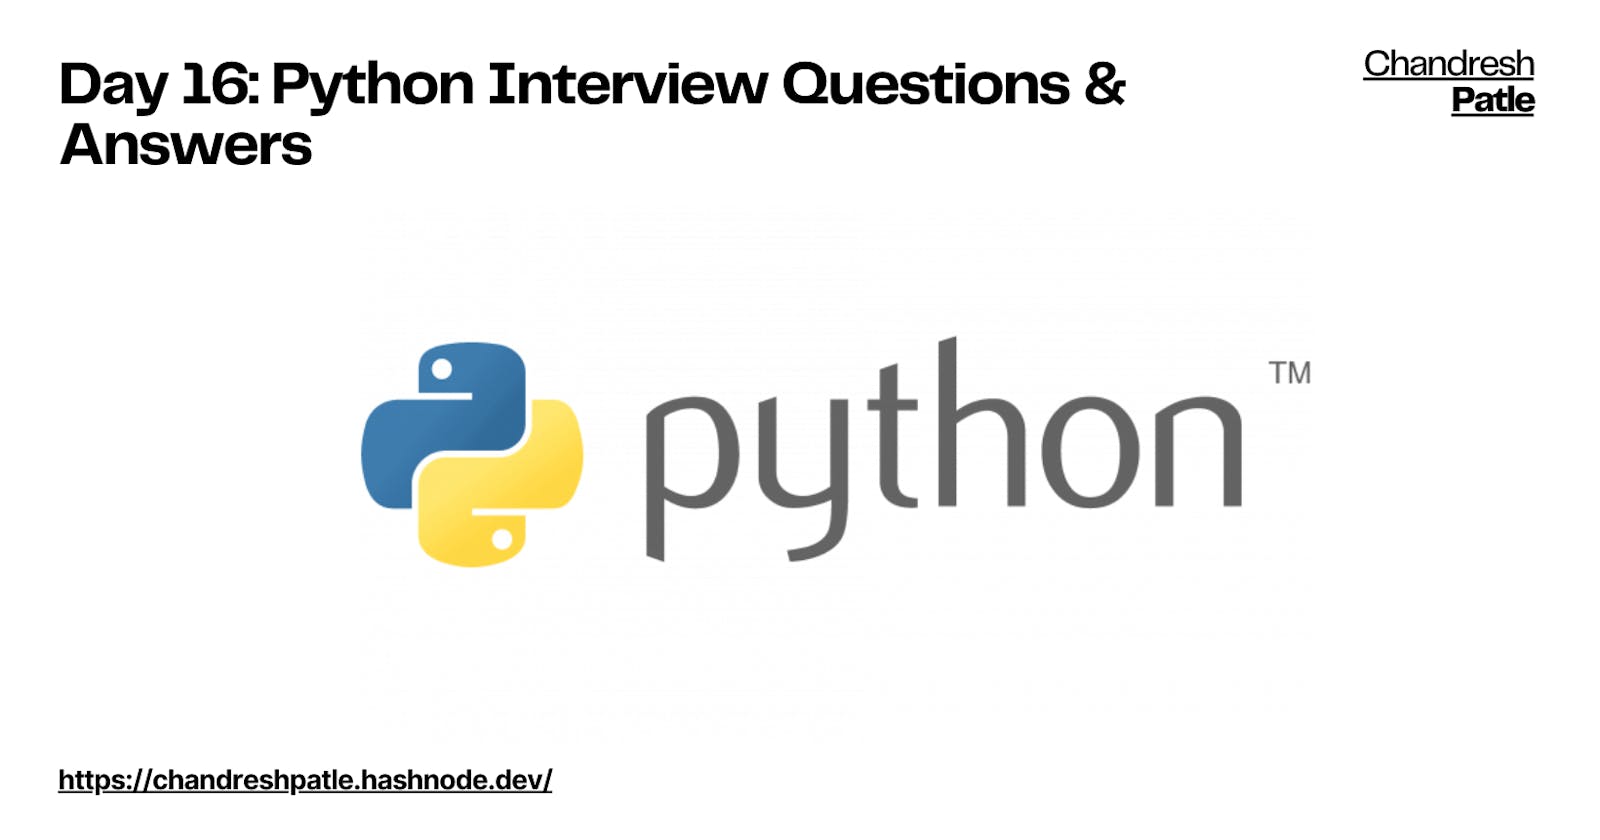 Day 16: Interview Questions (Beginner and Intermediate) and Real-World Python in DevOps